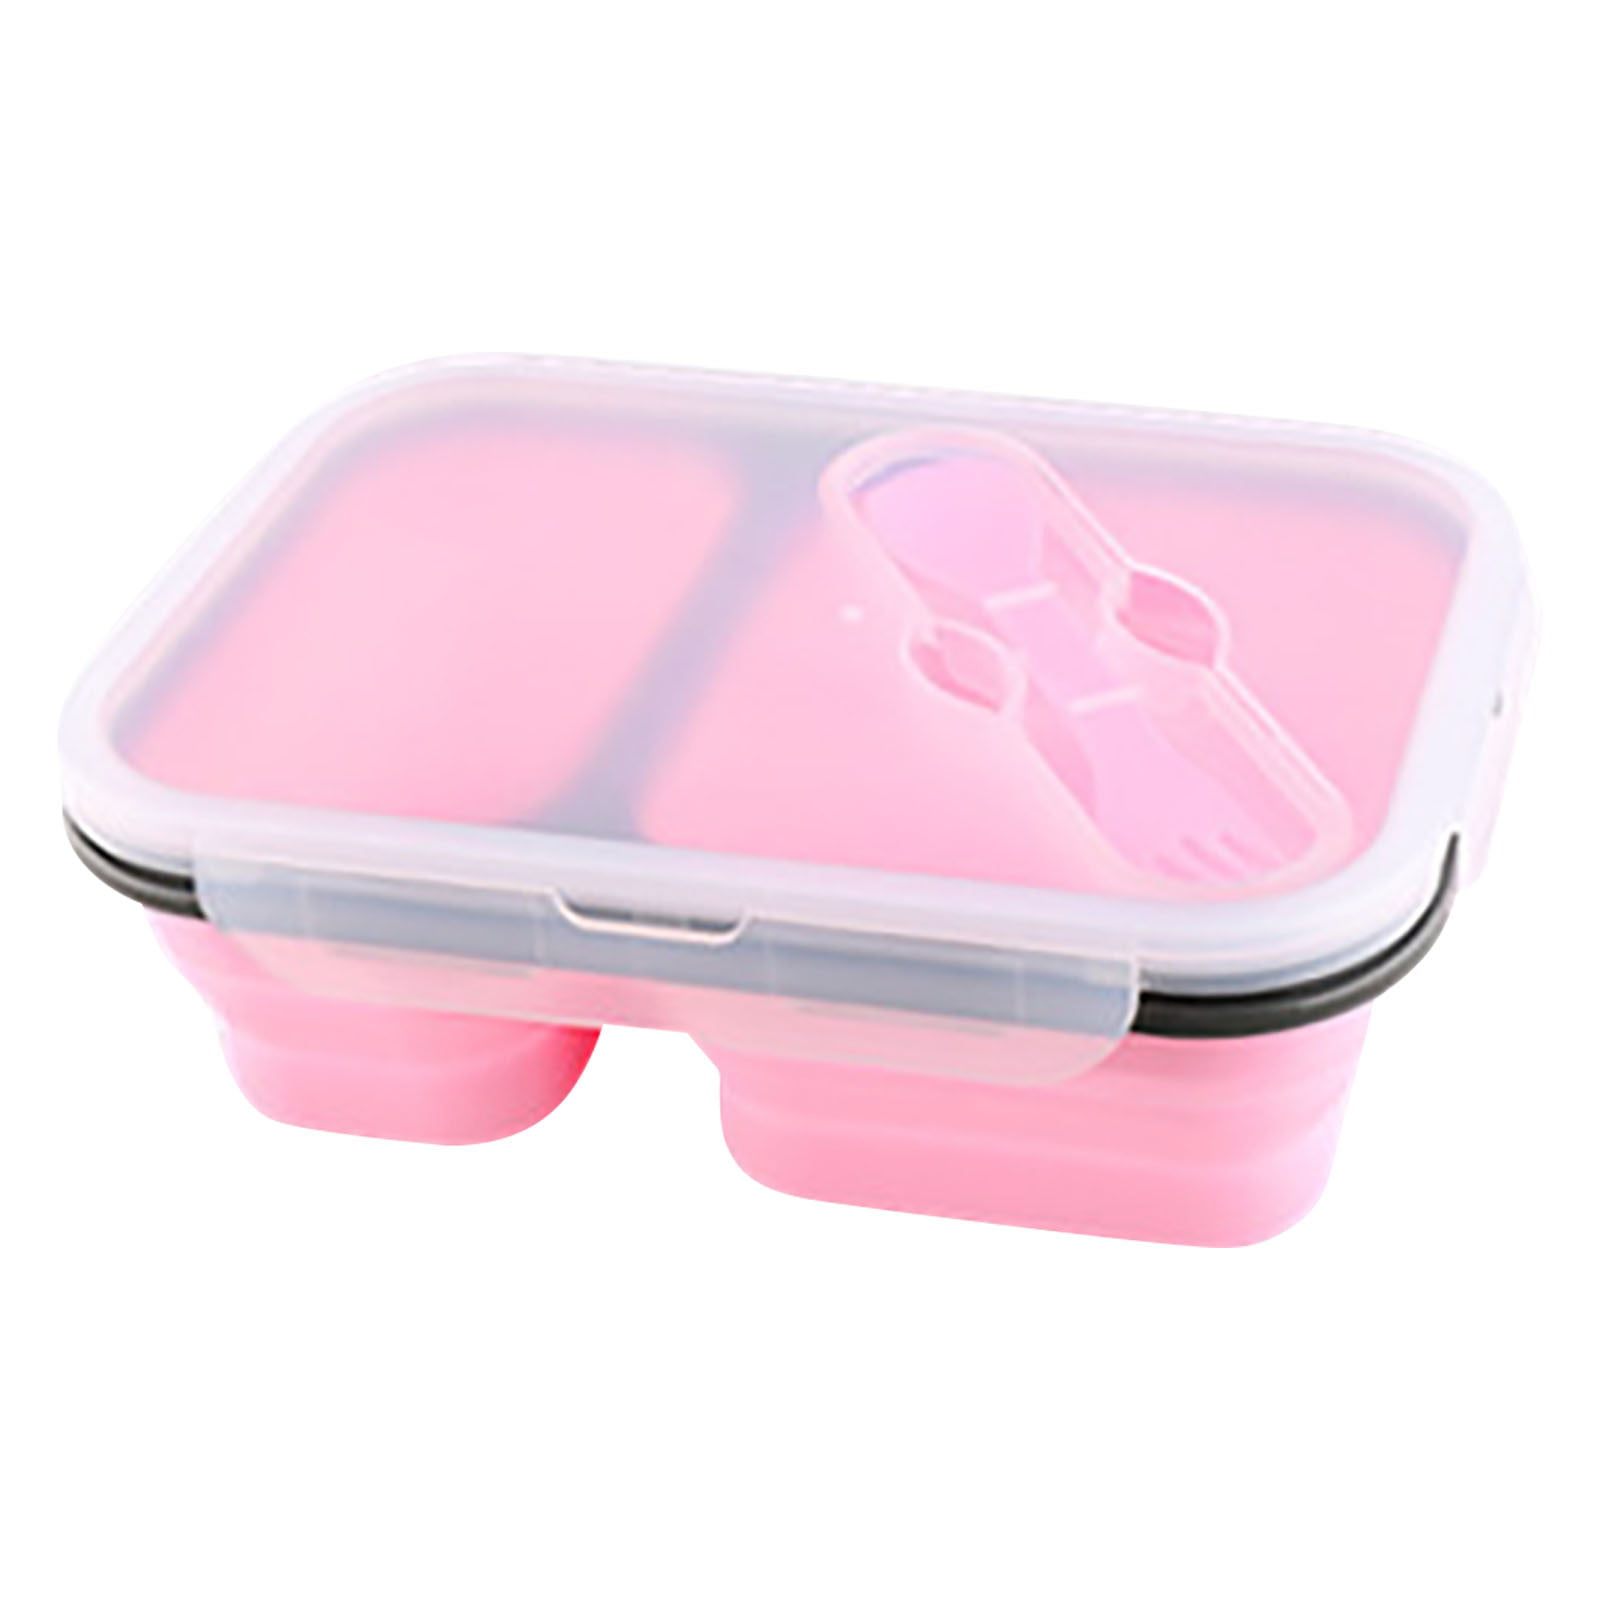 SWANZ Ceramic Bento Lunch Box with Silicone Lid & Compartment Divider for Adults, Reusable Airtight Meal Prep Food Storage, Sandwich, Snack, Salad